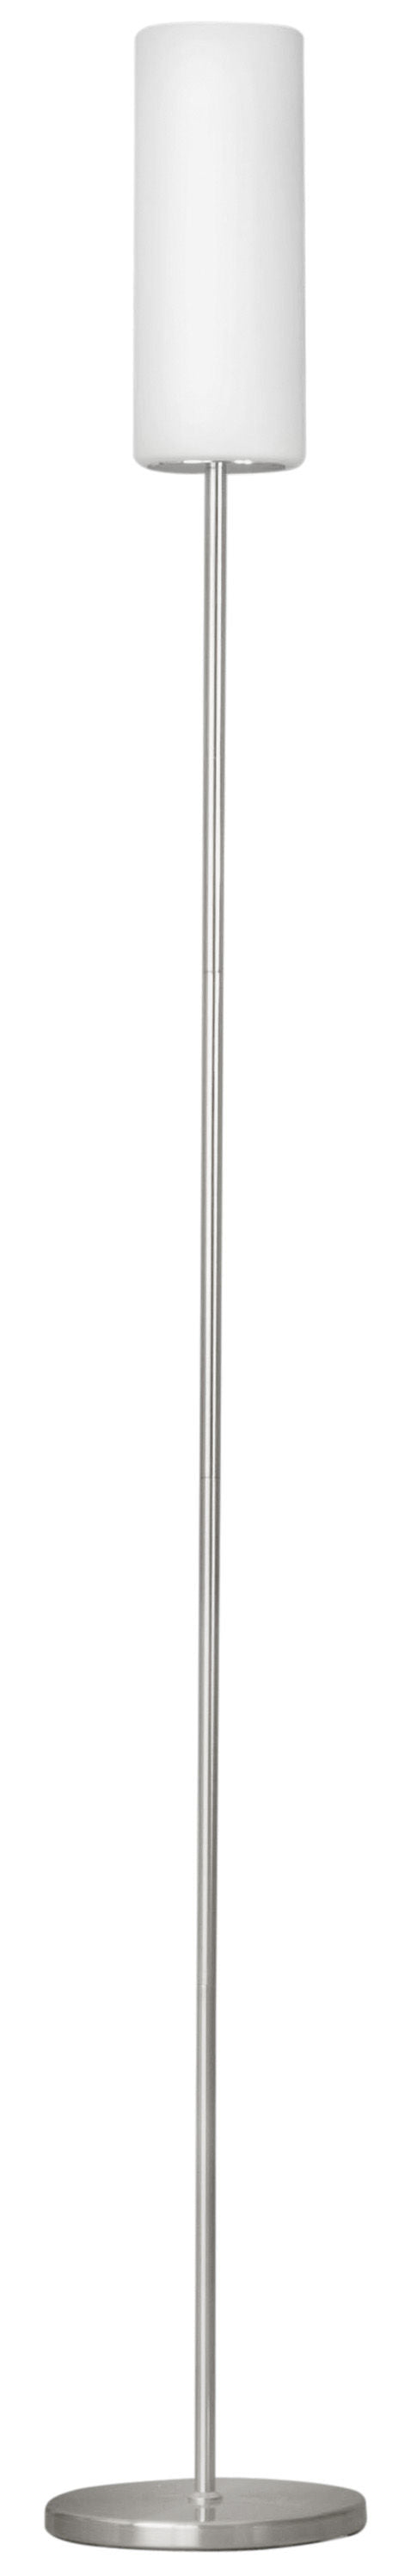 Troy 3 Floor lamp Stainless steel - 85982A | EGLO